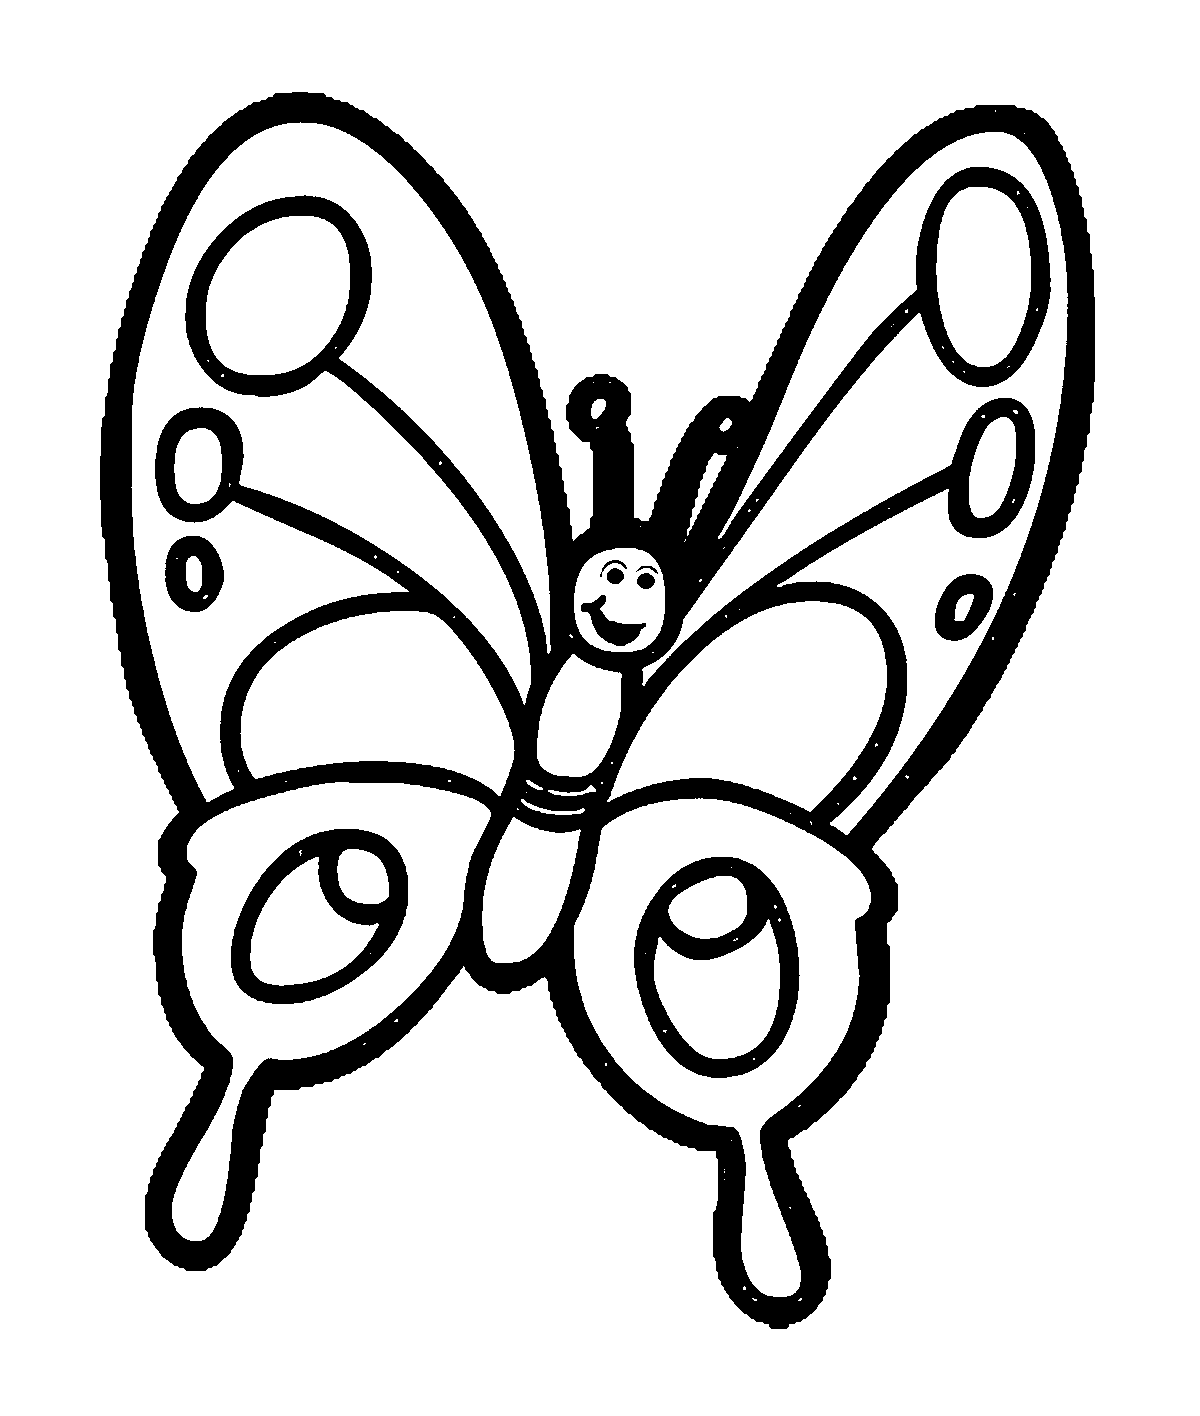 Butterfly drawing at getdrawings. White clipart black and white